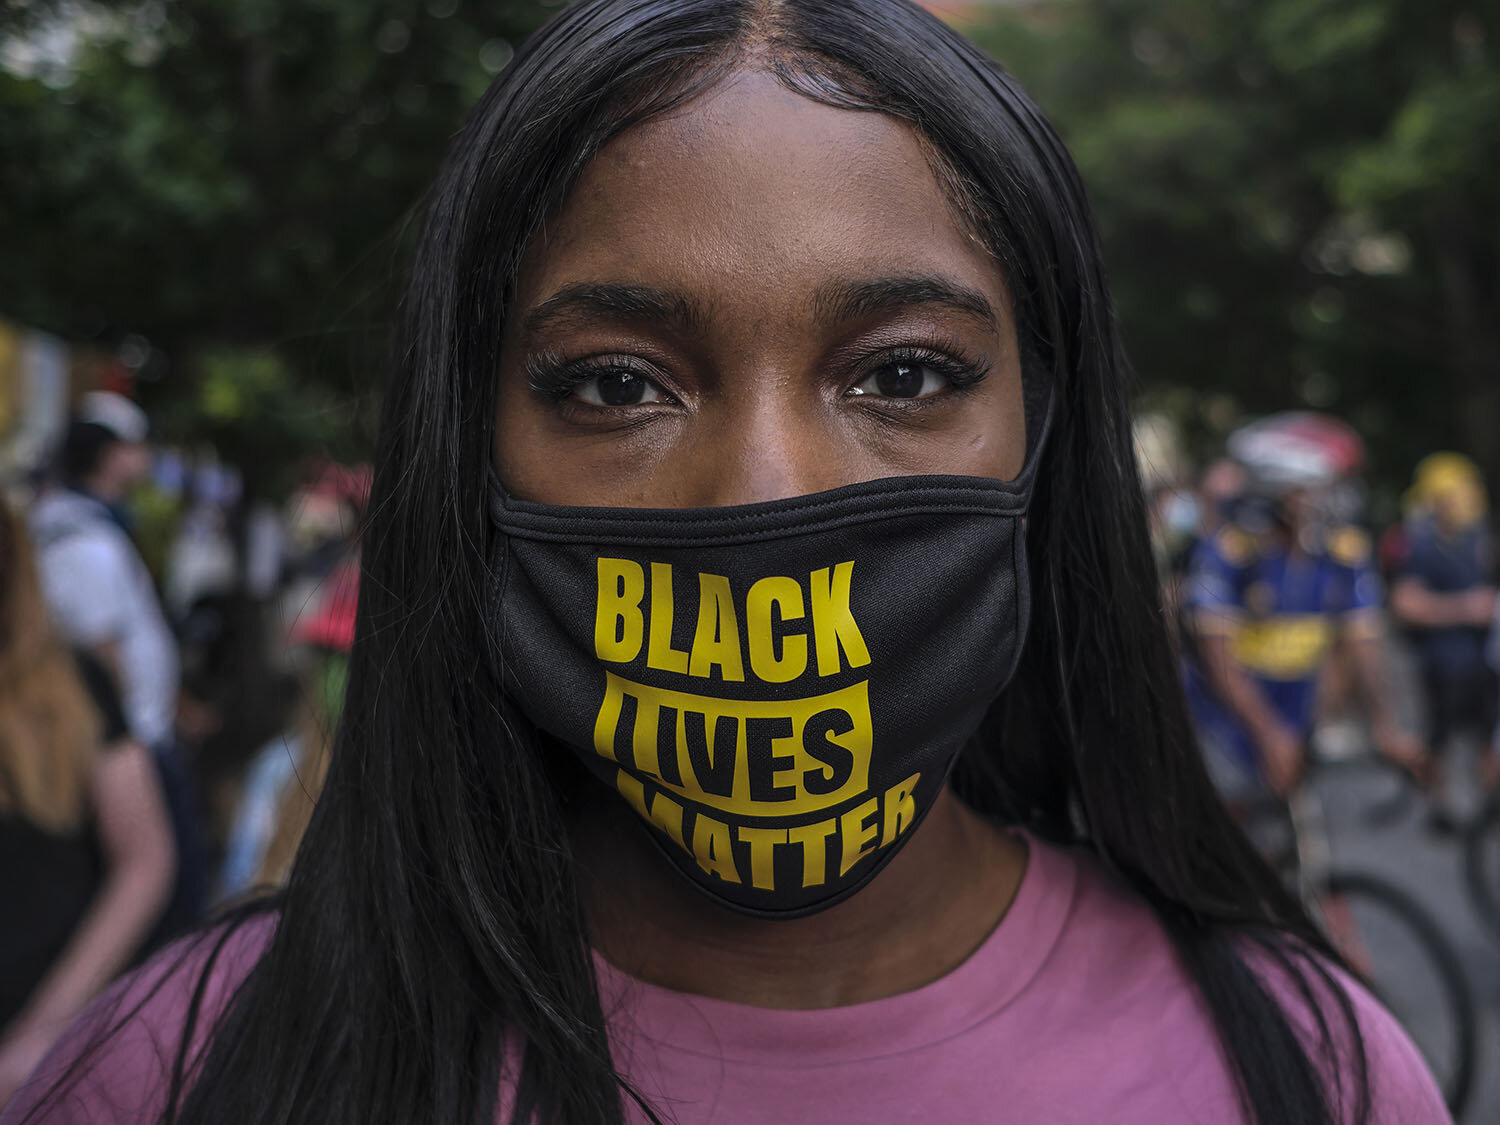  Name:  Shanquette Dannah    Age: 30   Occupation: Teacher   Date and Place the photo was taken: June 13, 2020, Black Lives Matter Plaza, Washington DC   Her Statement:  "As a black woman working in education and serving students from historically un